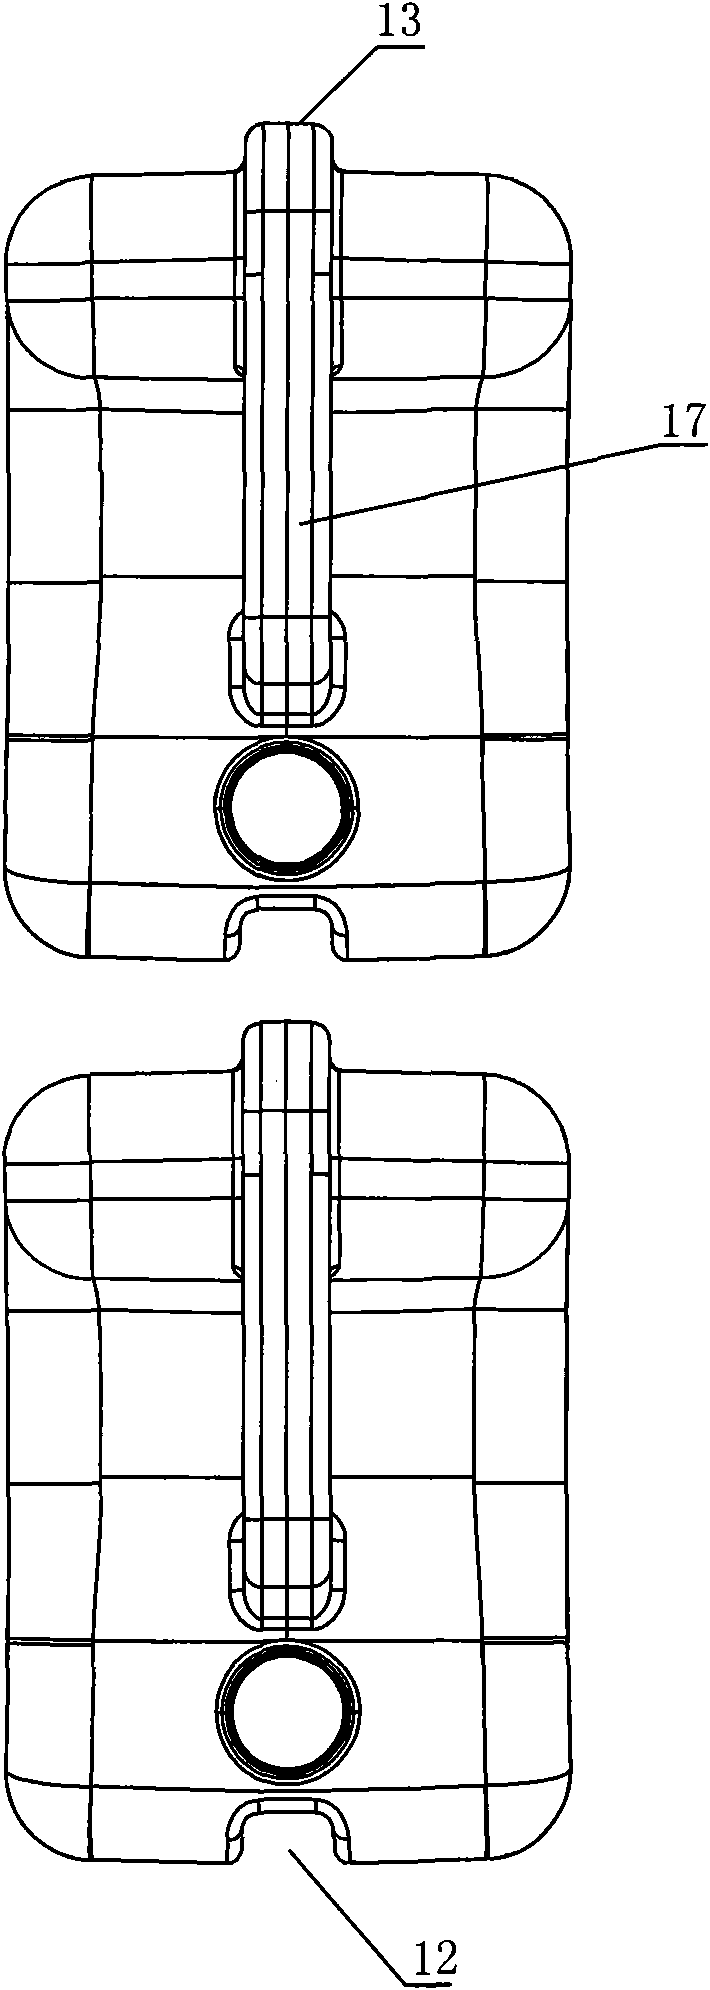 Bottle body capable of being placed by overlapping